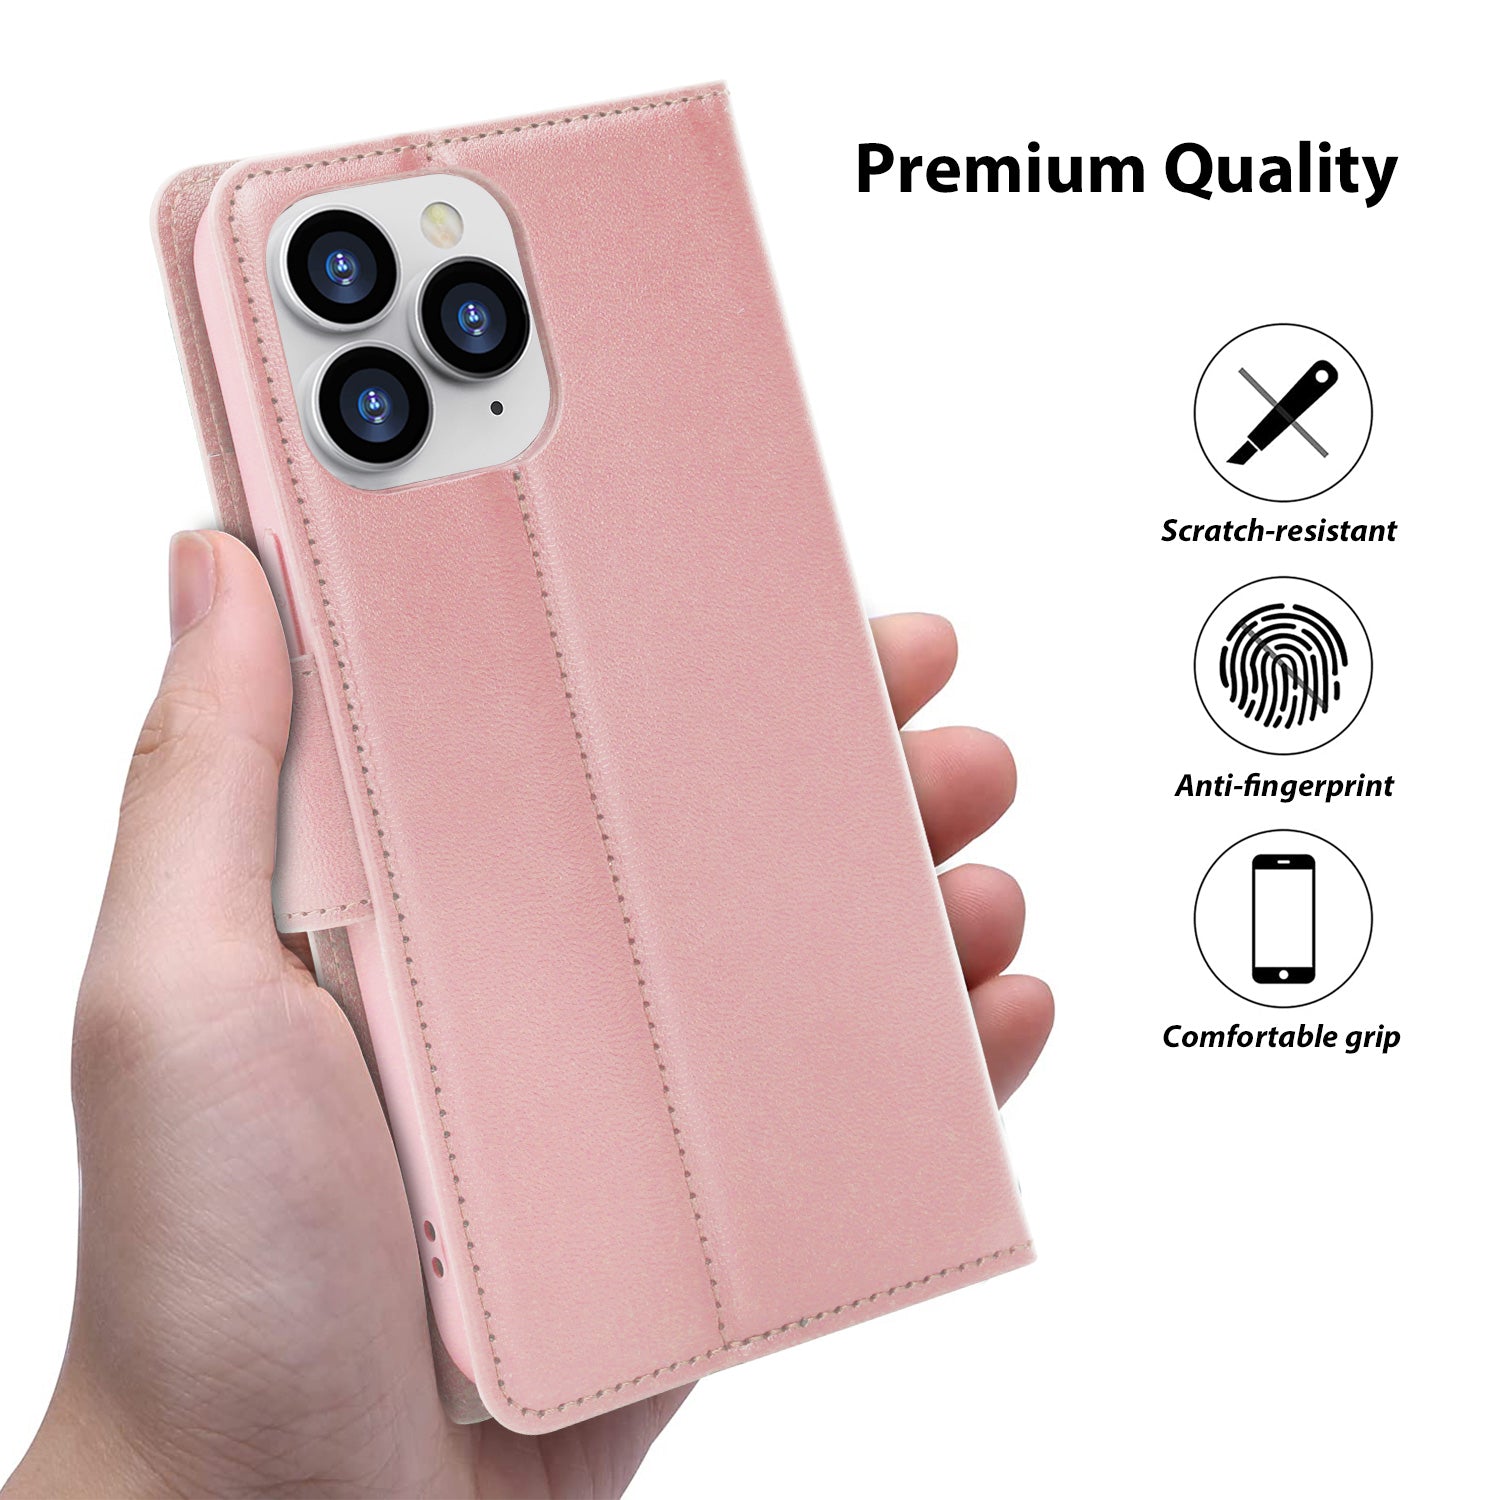 Tough On iPhone X / XS Case Leather Wallet Cover Rose Gold